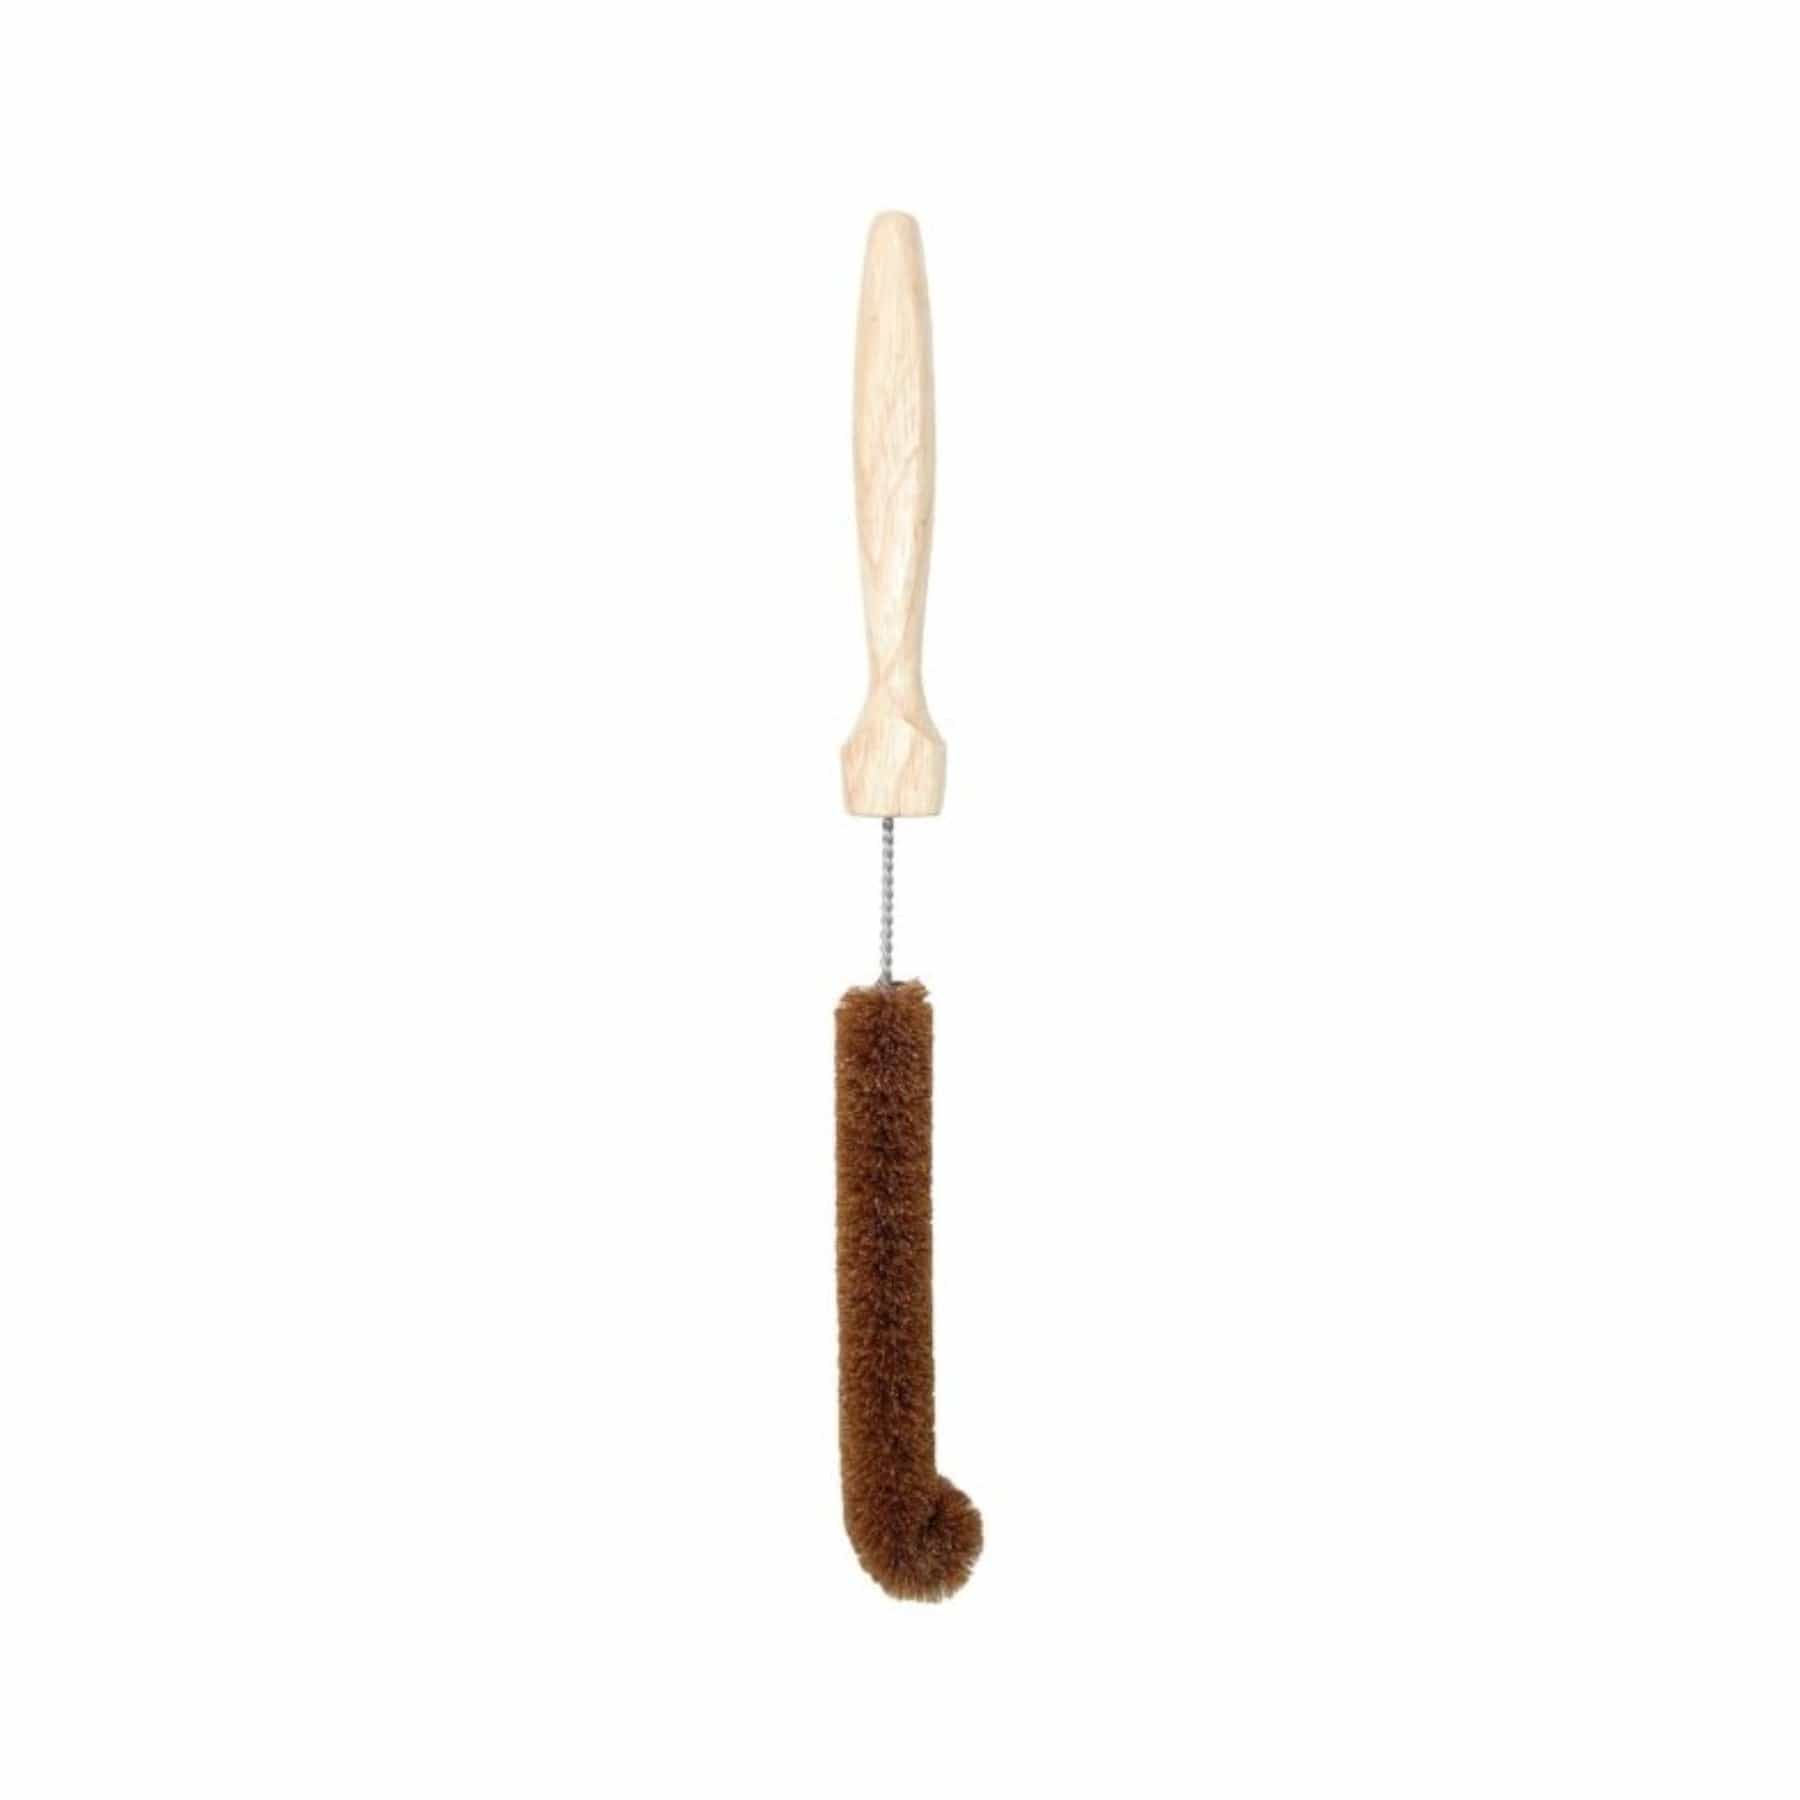 Wooden-handled bottle brush with brown bristles isolated on white background.